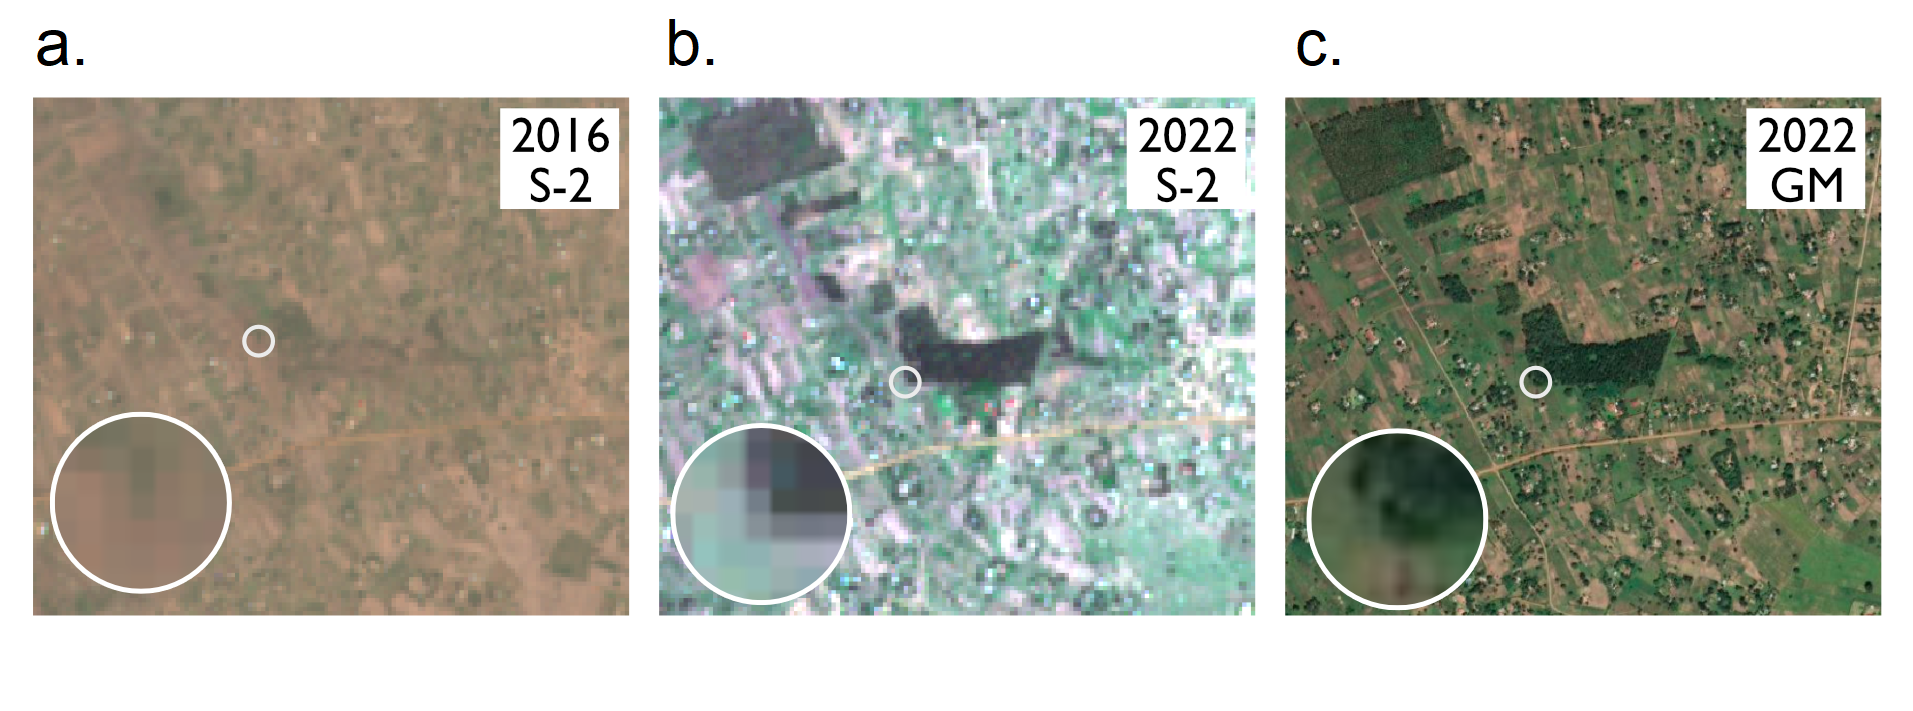 A three panel image showing various satellite images for an area in The Mount Elgon region in eastern Uganda. The left image was taken in 2016 using the Sentinel-2 satellite and shows a fairly brown landscape. The middle was taken in 2022 using the Sentinel-2 satellite, showing a change to a greener landscape. The right image was taken from Google Maps in 2022, which is higher resolution than the Sentinel-2 images.